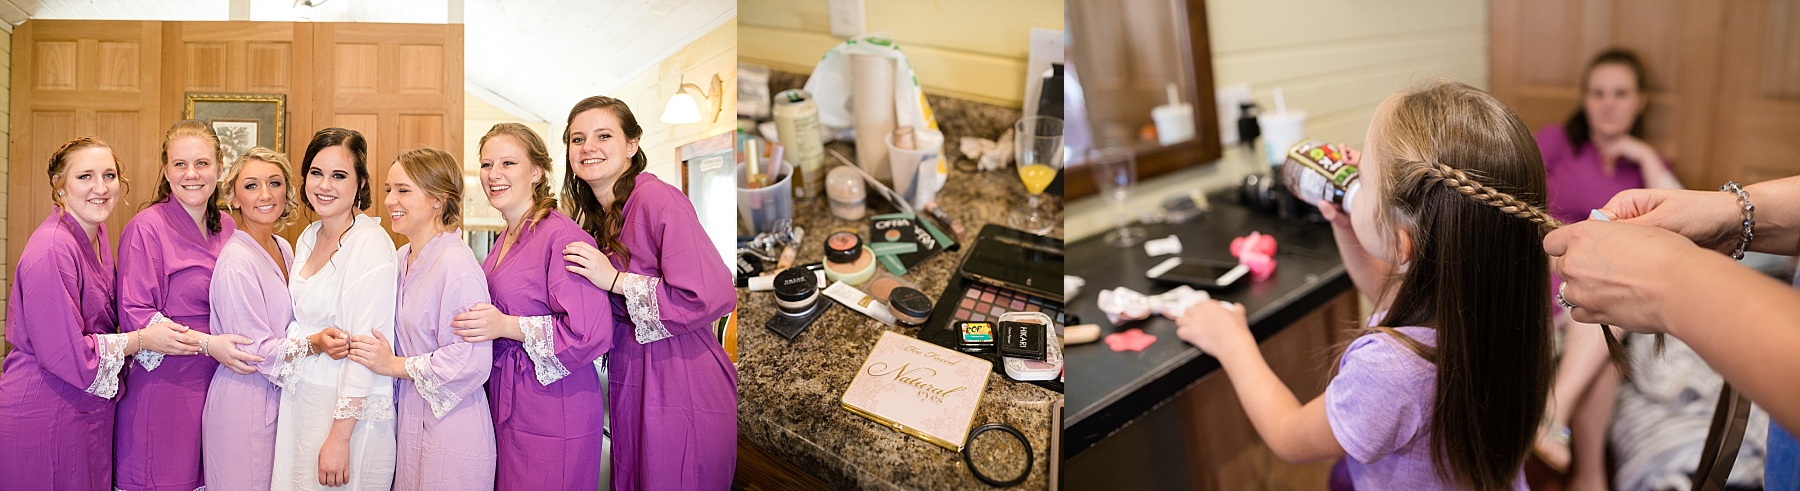 bride and her bridesmaids getting ready at Celebrations at the Gables